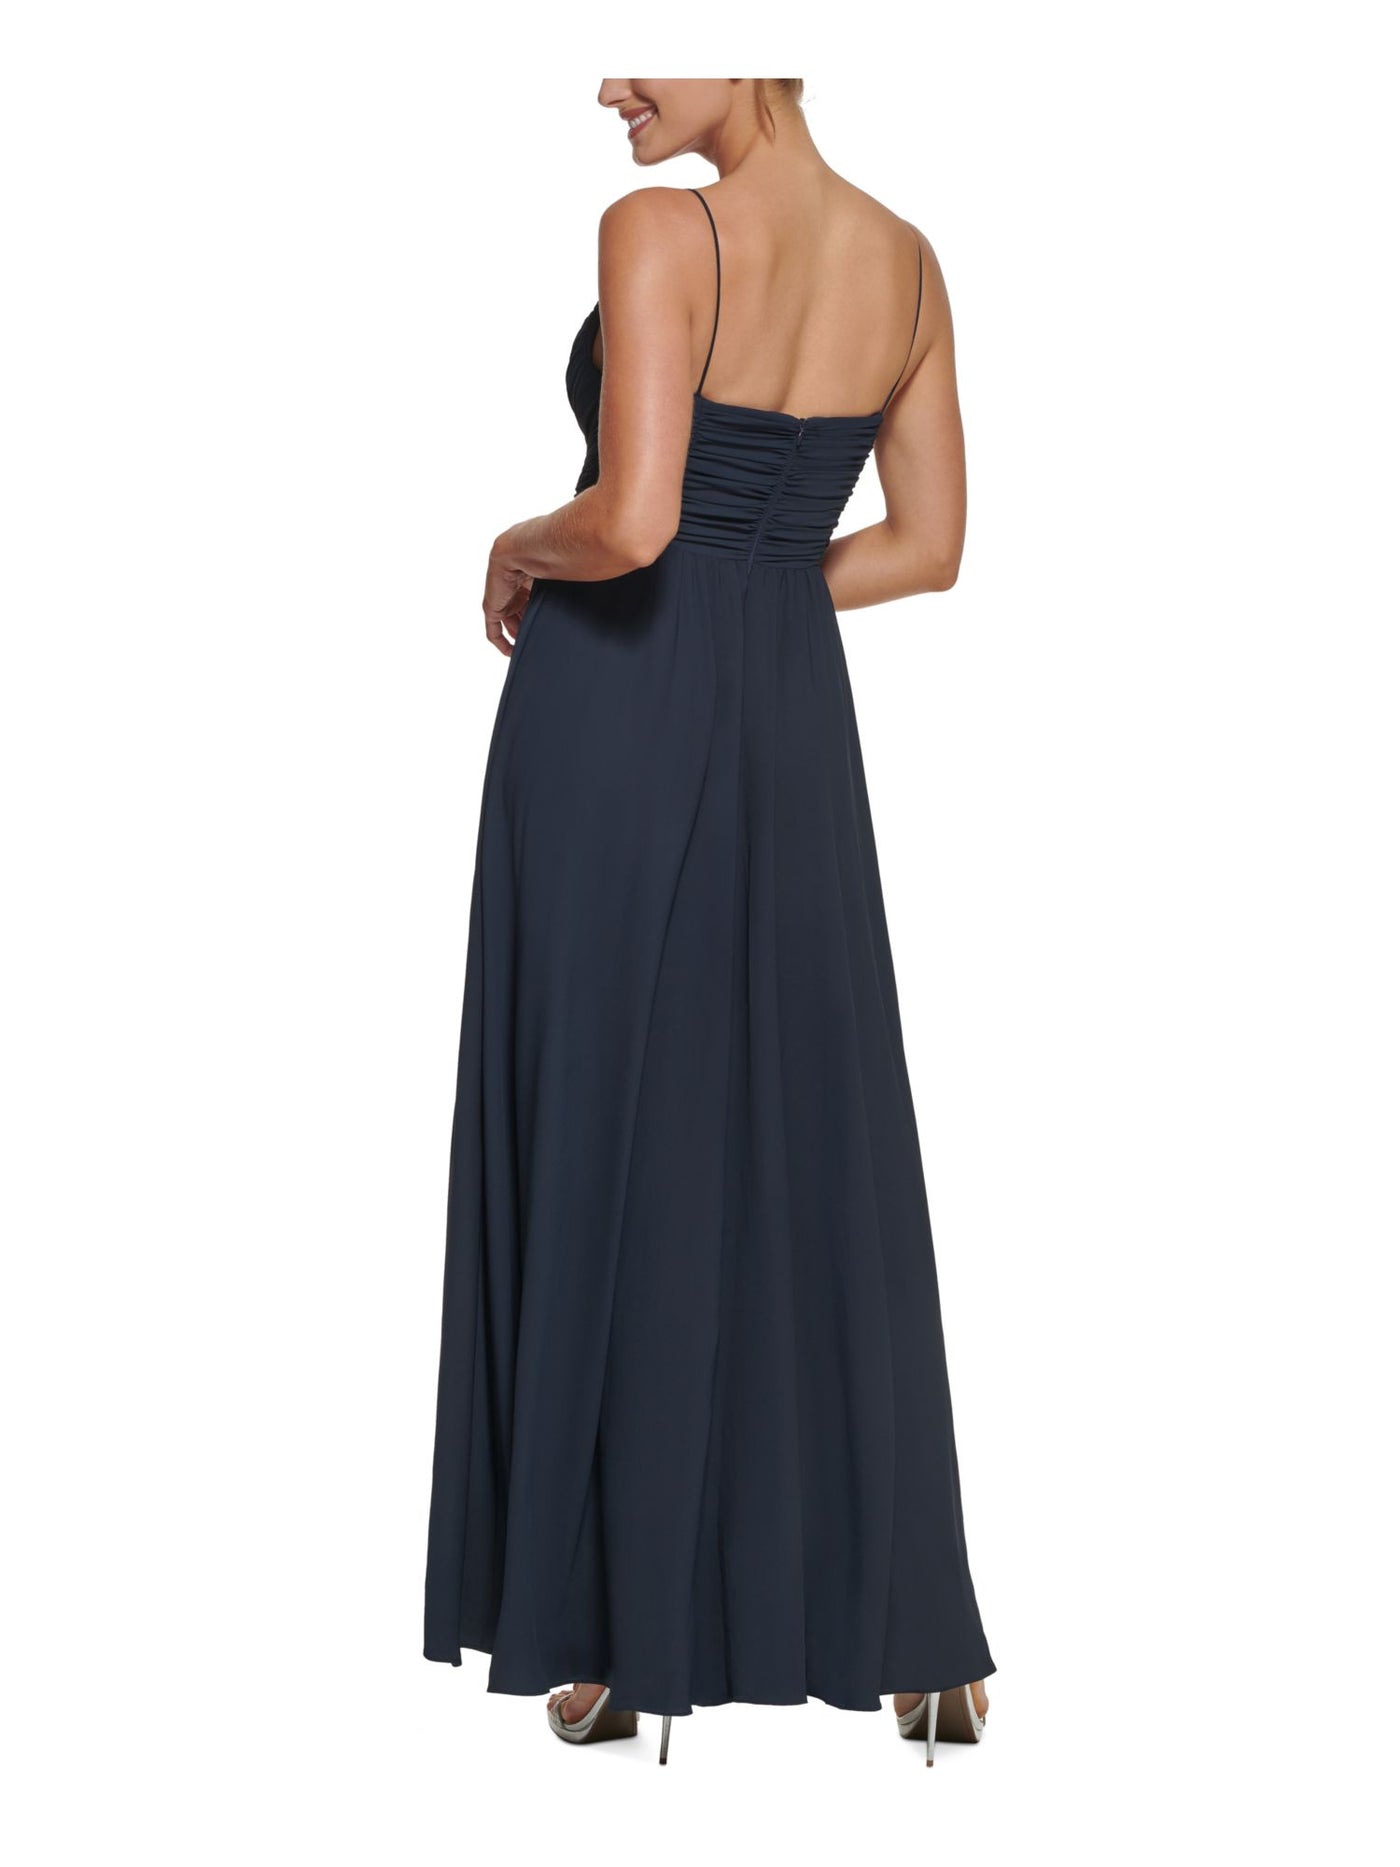 DKNY Womens Navy Ruched Zippered Lined Spaghetti Strap V Neck Full-Length Formal Gown Dress 8